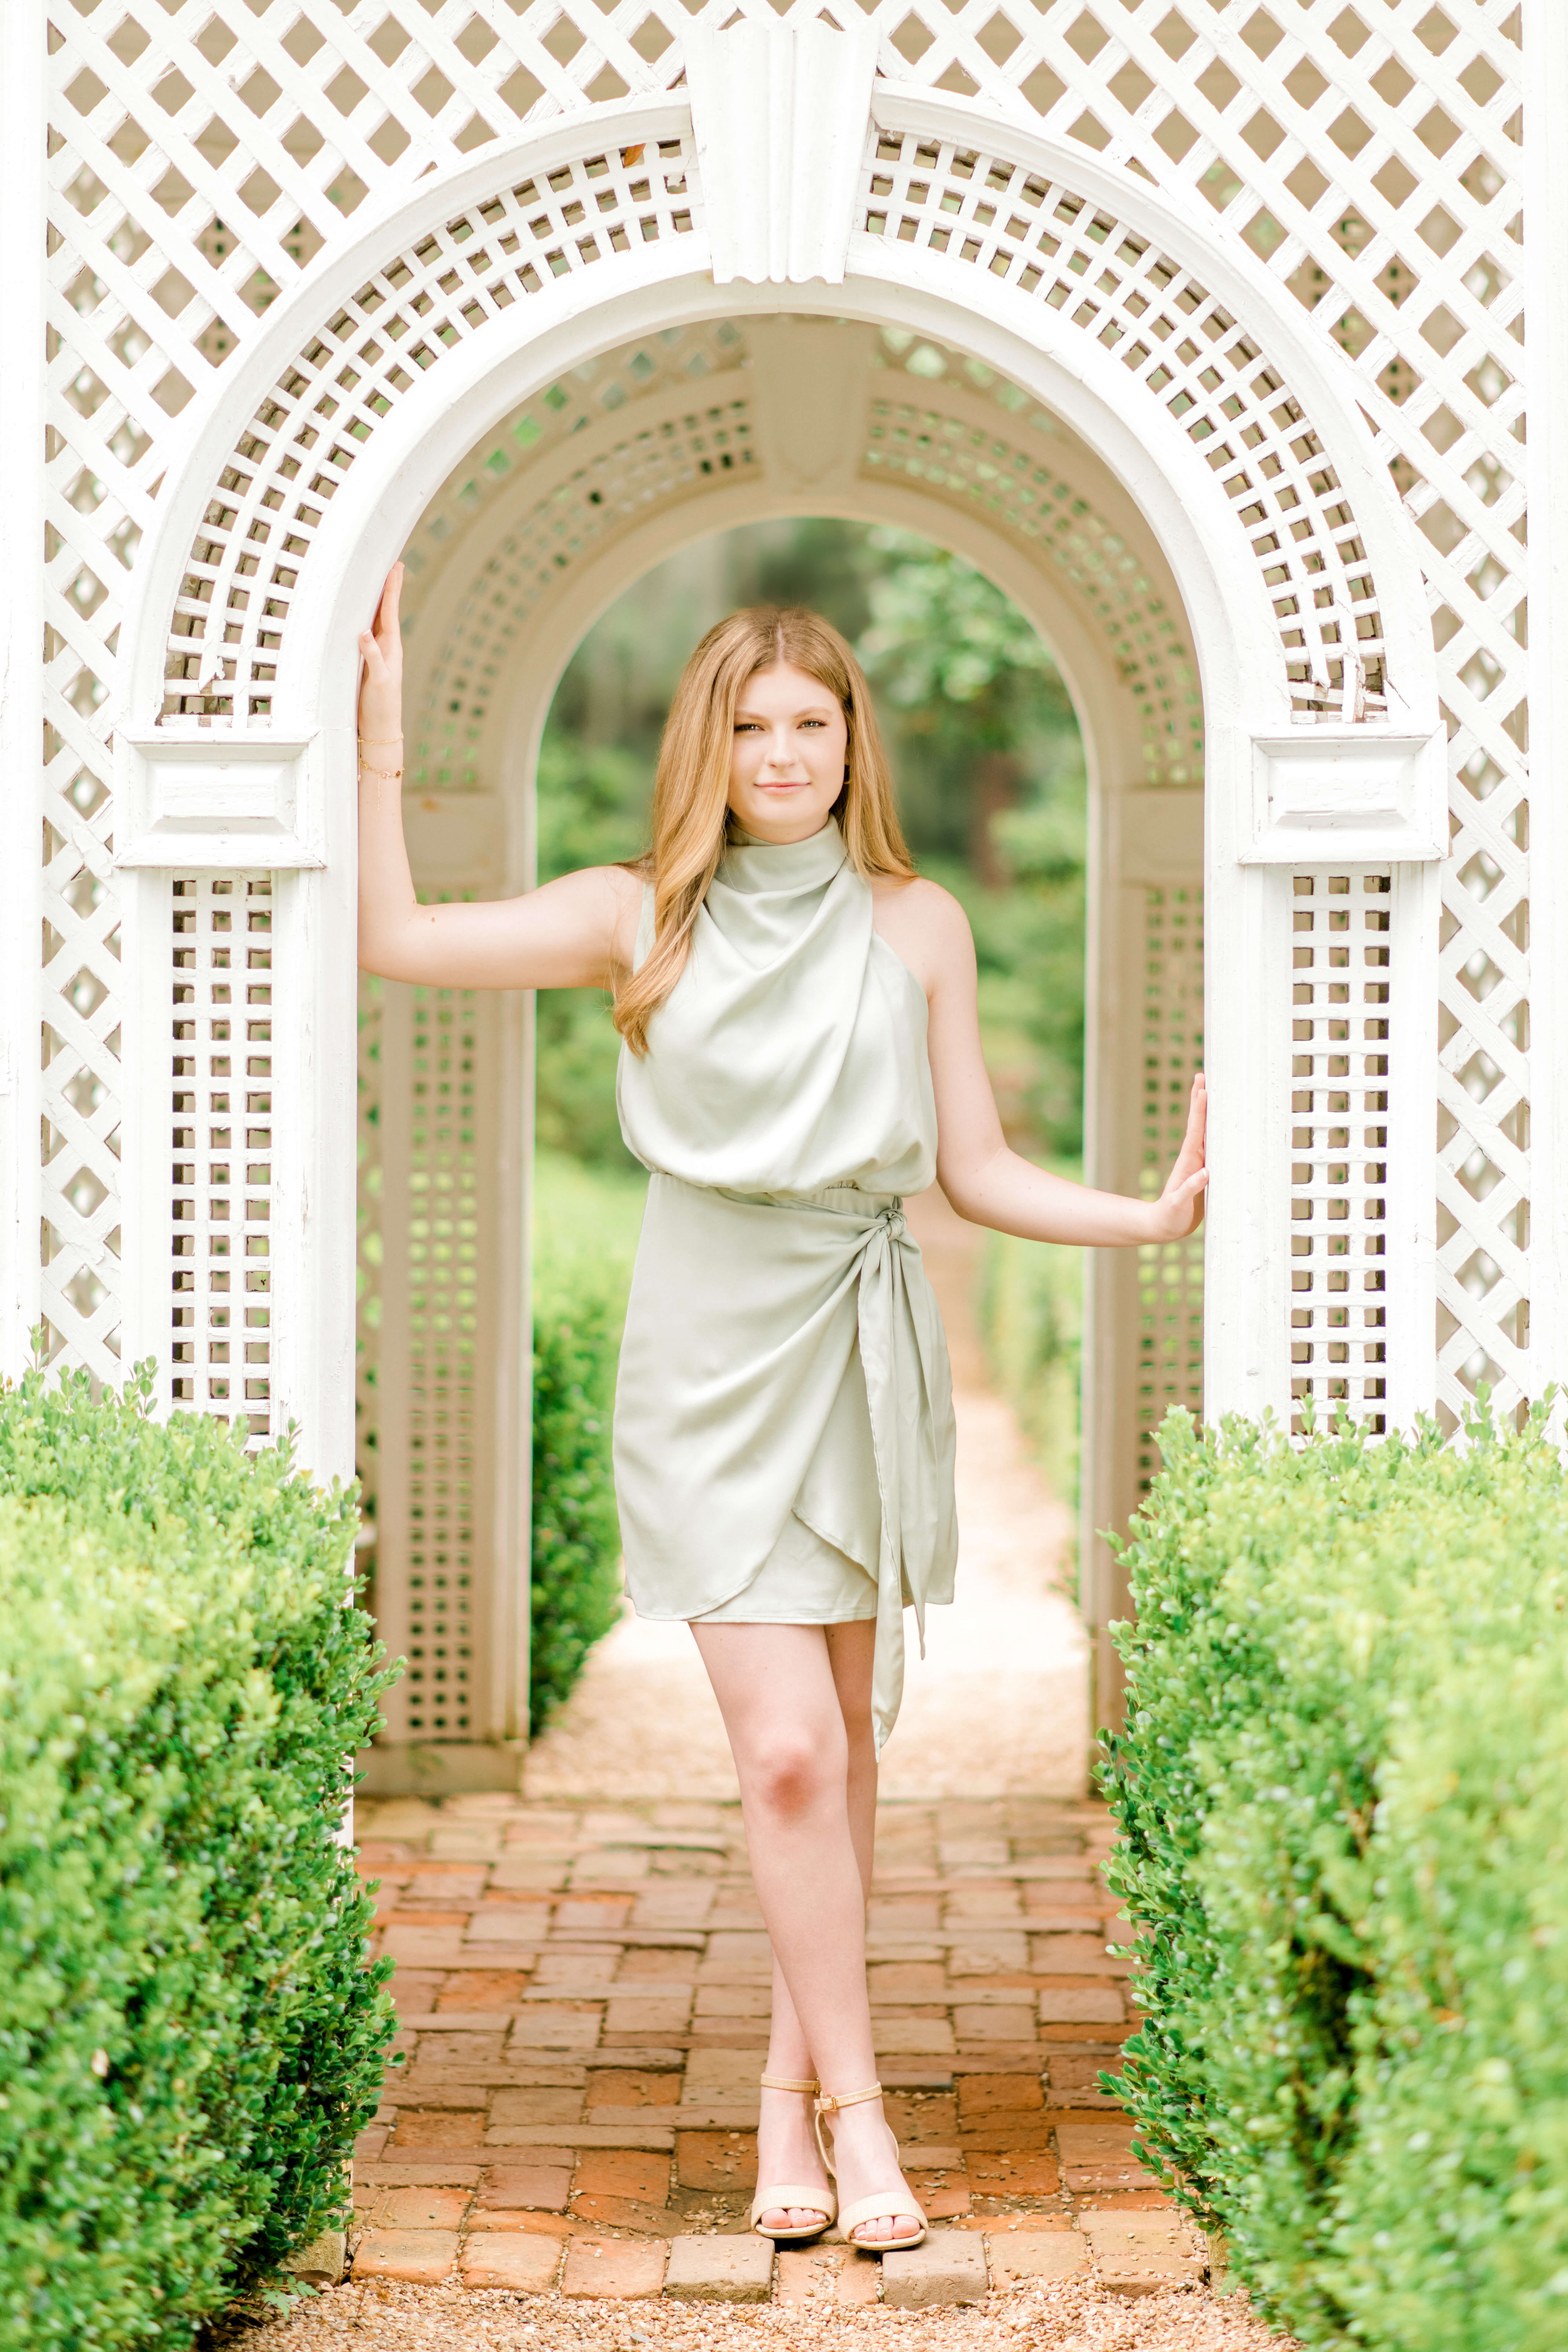 A gorgeous green dress accentuates the strawberry blonde hair as a senior poses in front of a terrace.